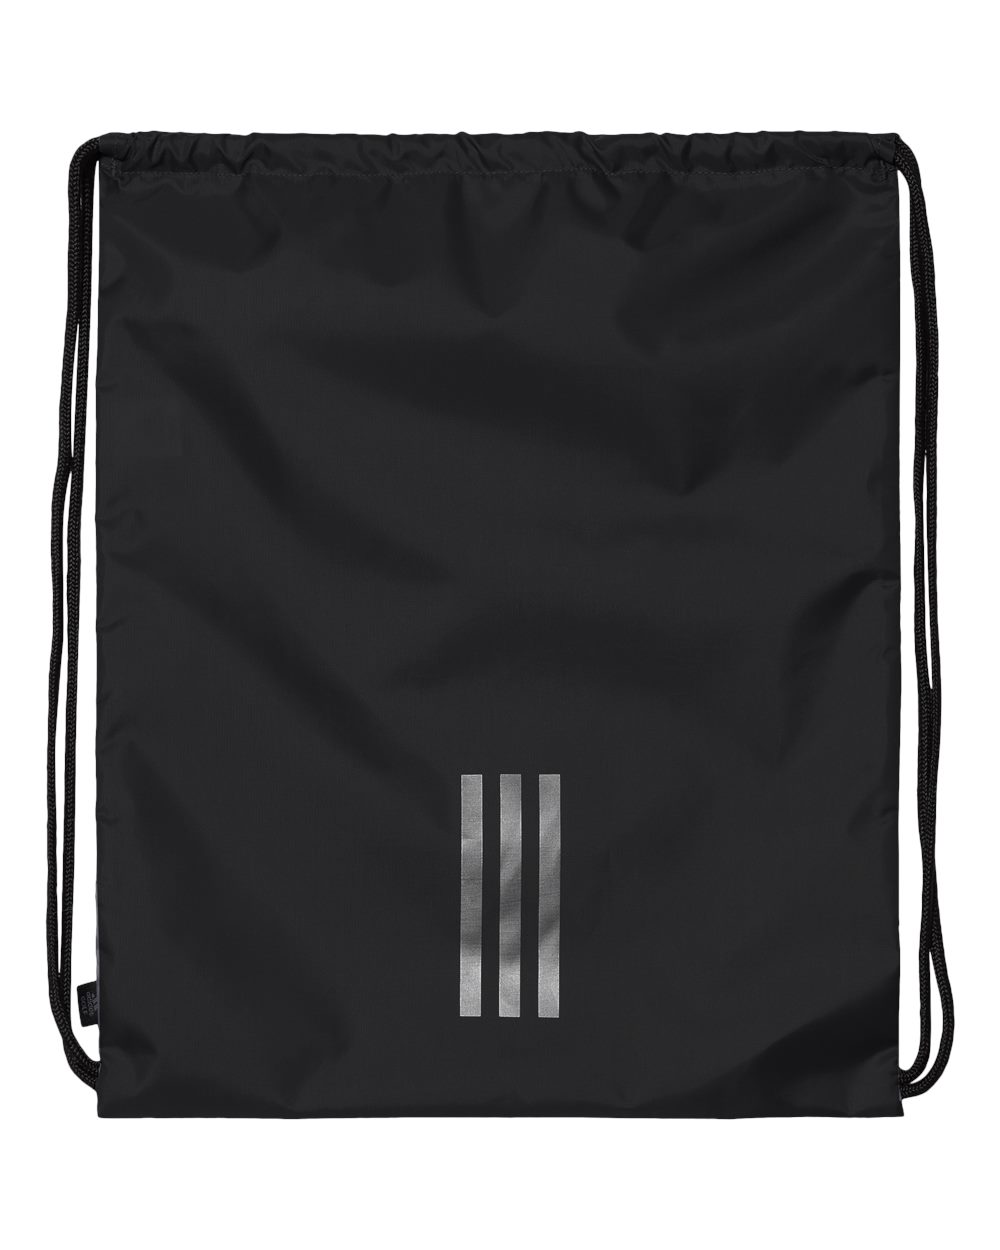 Picture of Adidas Vertical 3-Stripes Gym Sack 